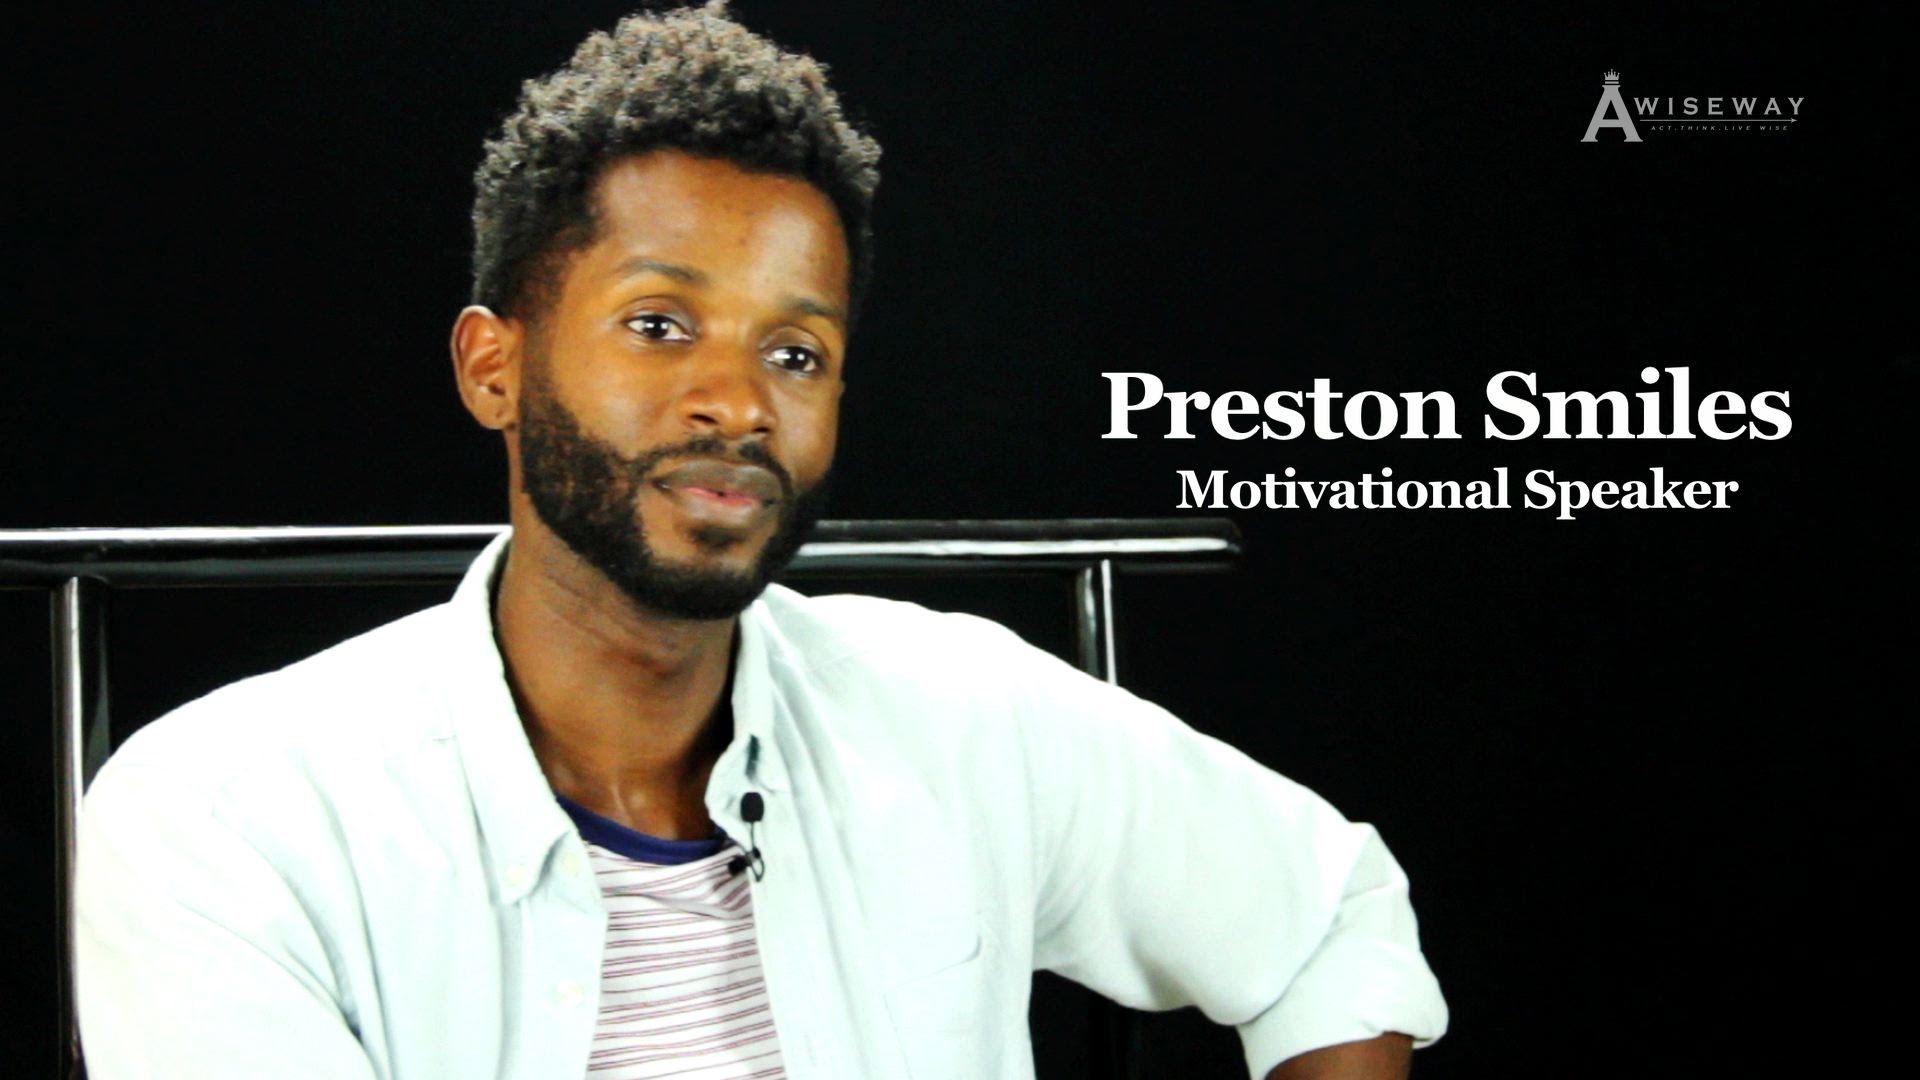 Preston Smiles Explains Why We Should Not Attach Ourselves to the Idea of Being Successful